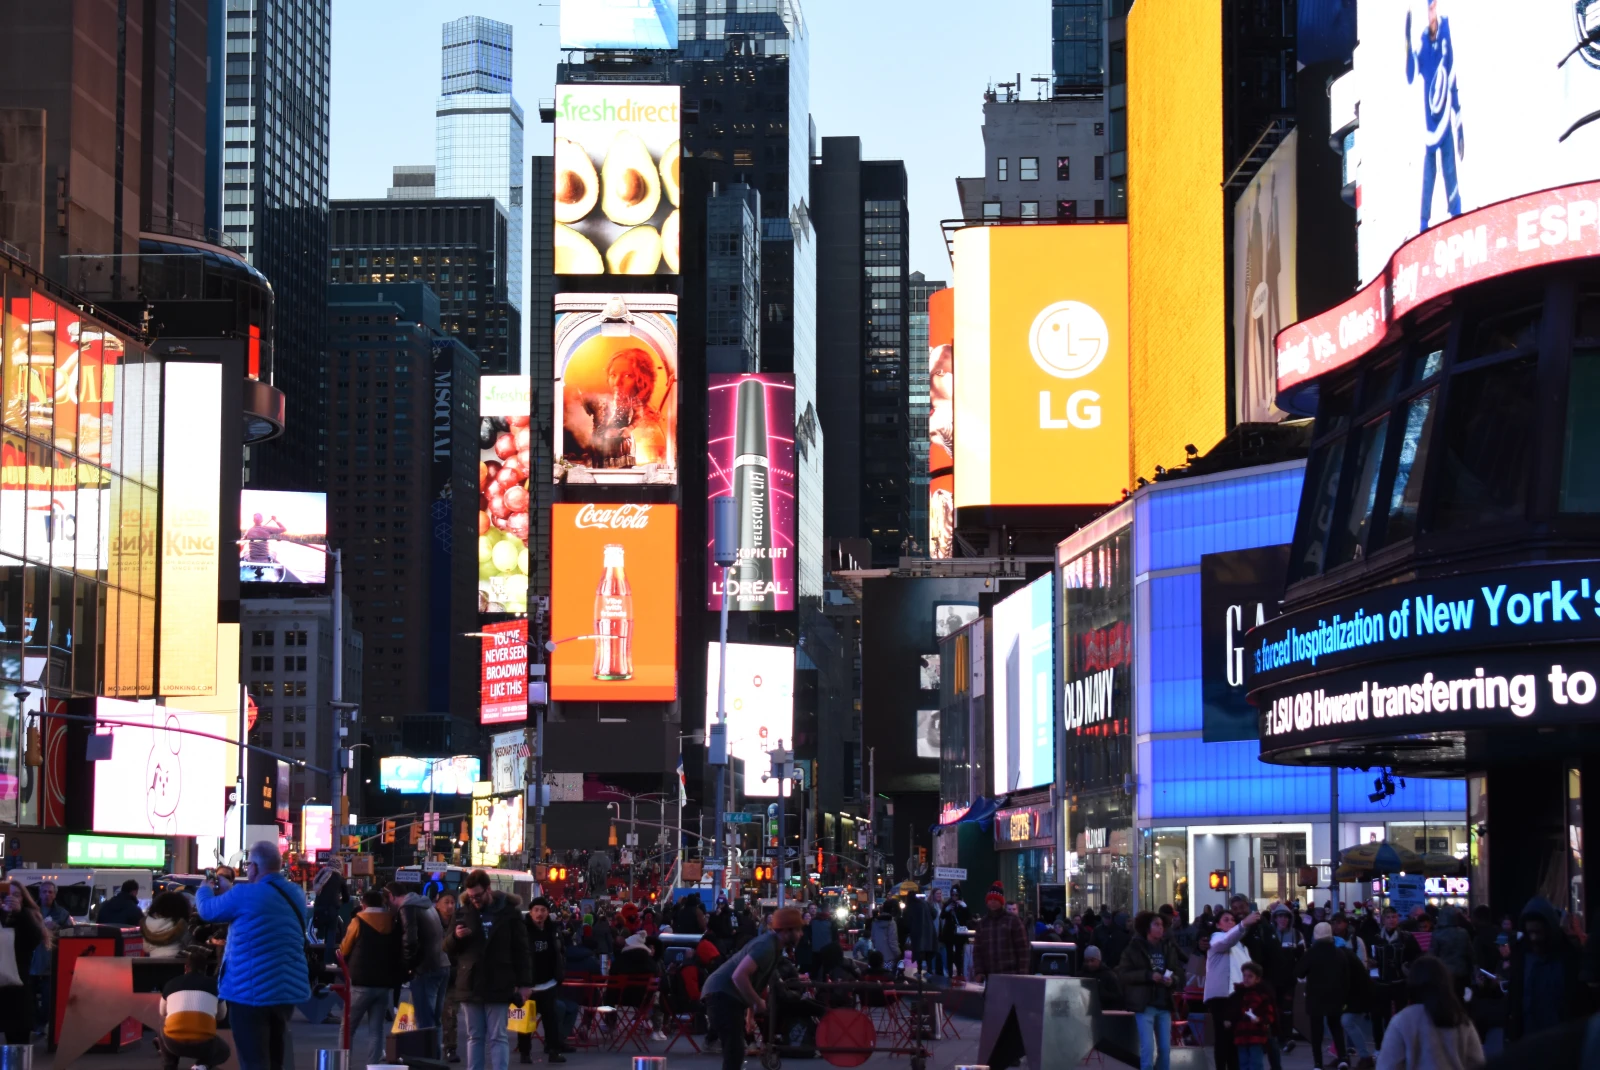 Time square at night